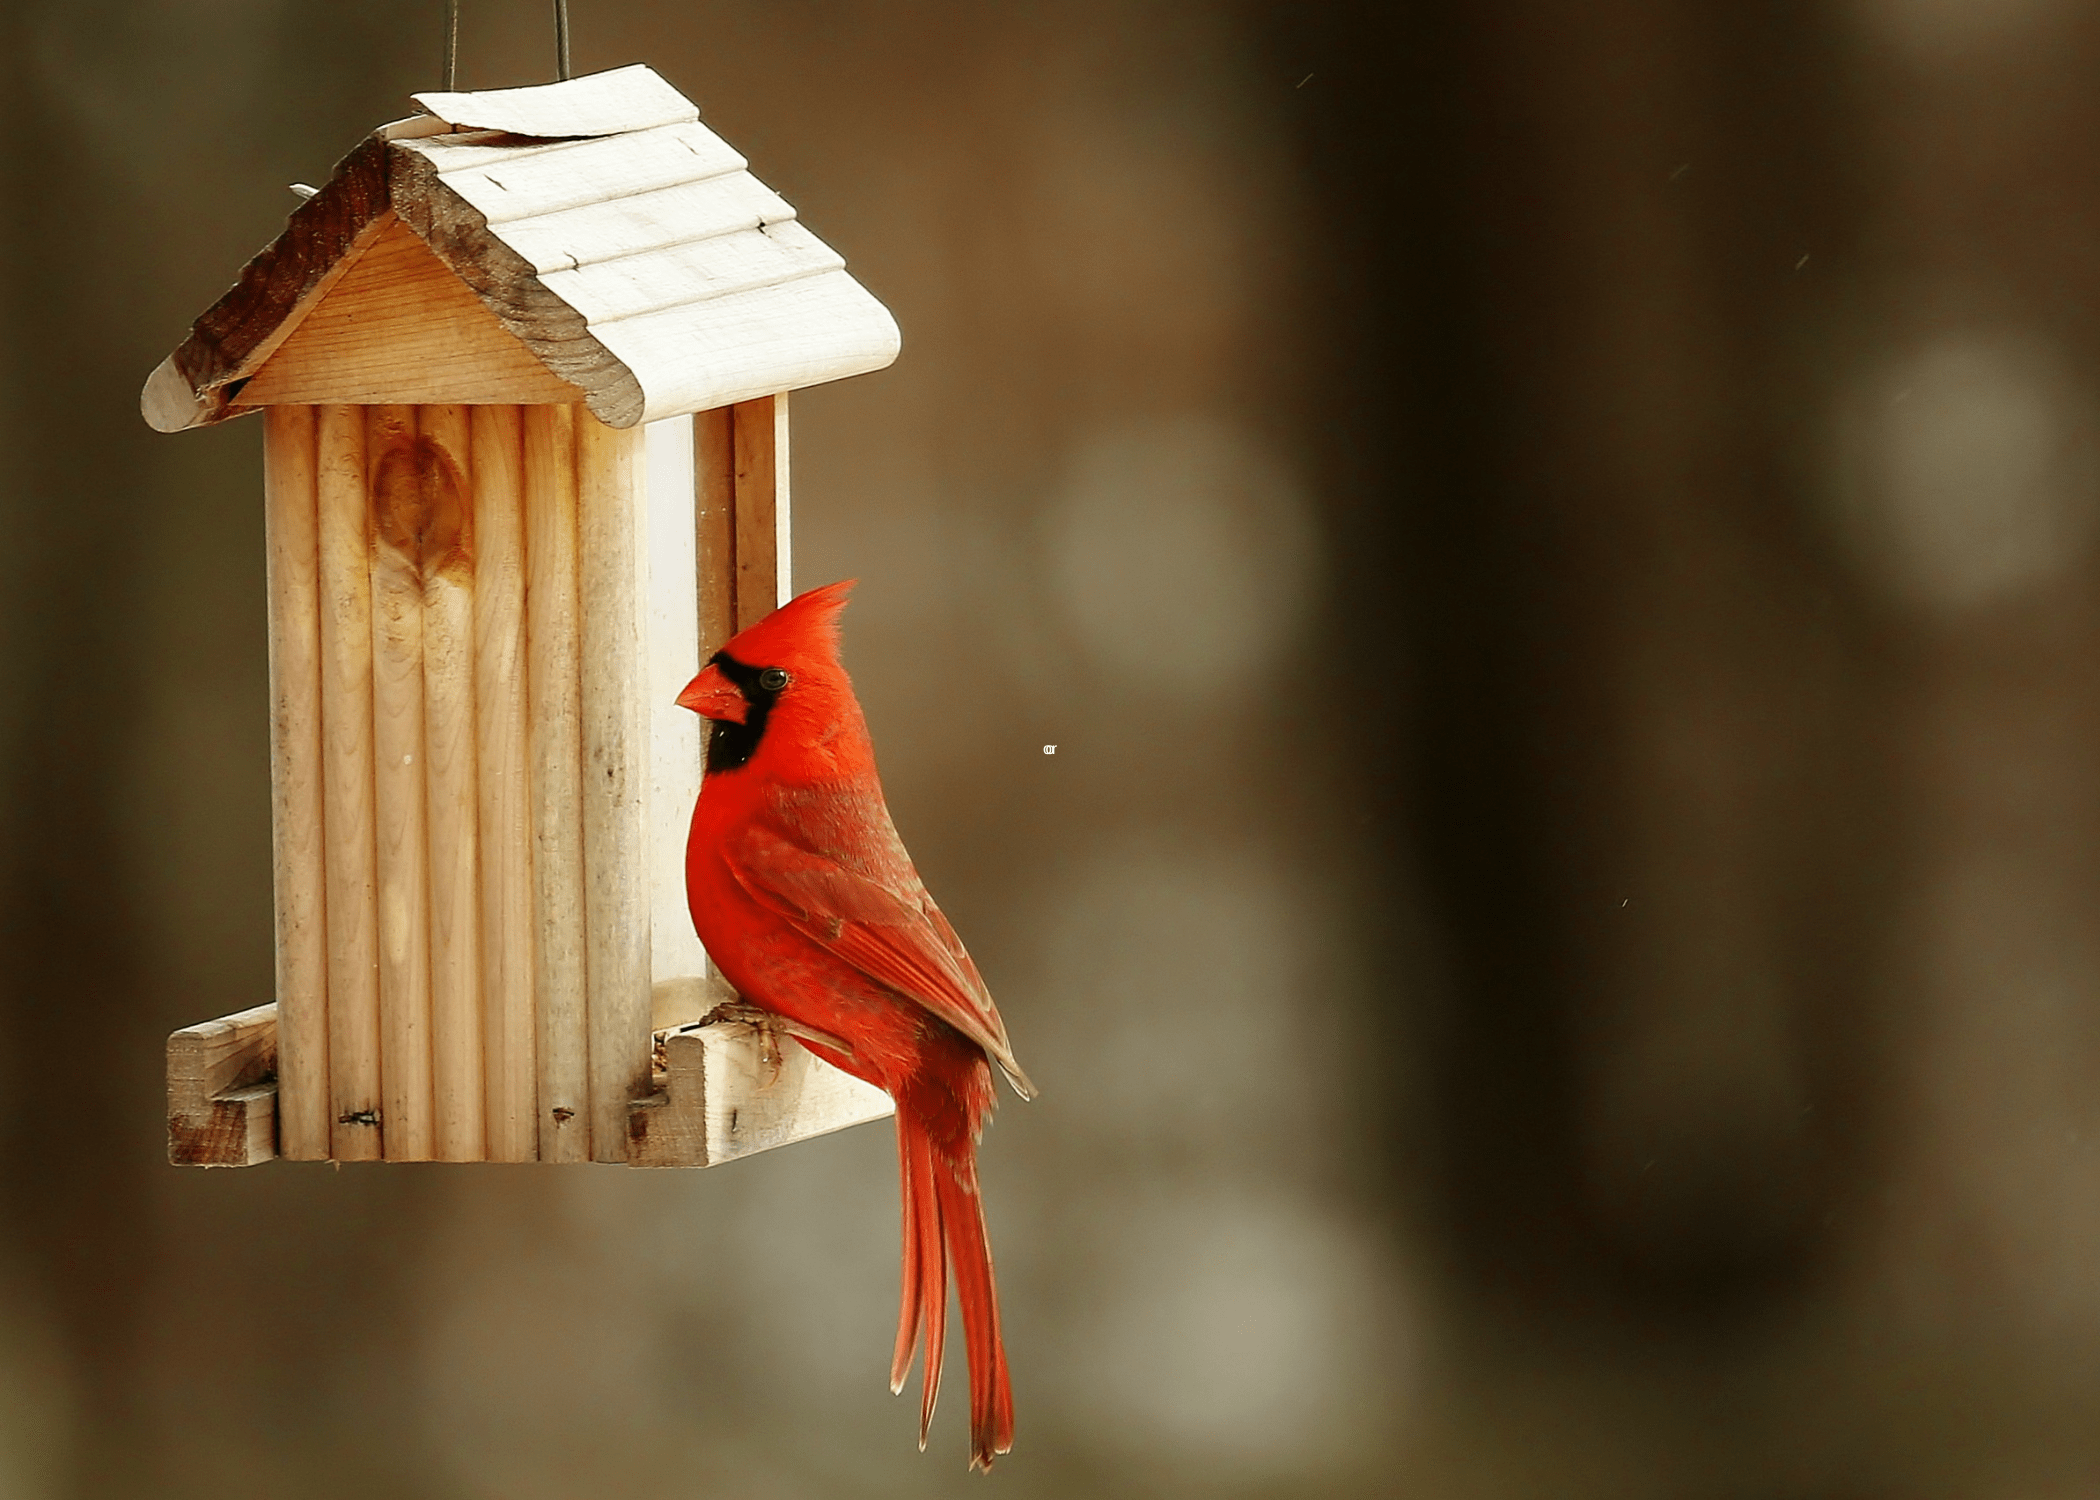 all wood stick birdhouse with red cardinal